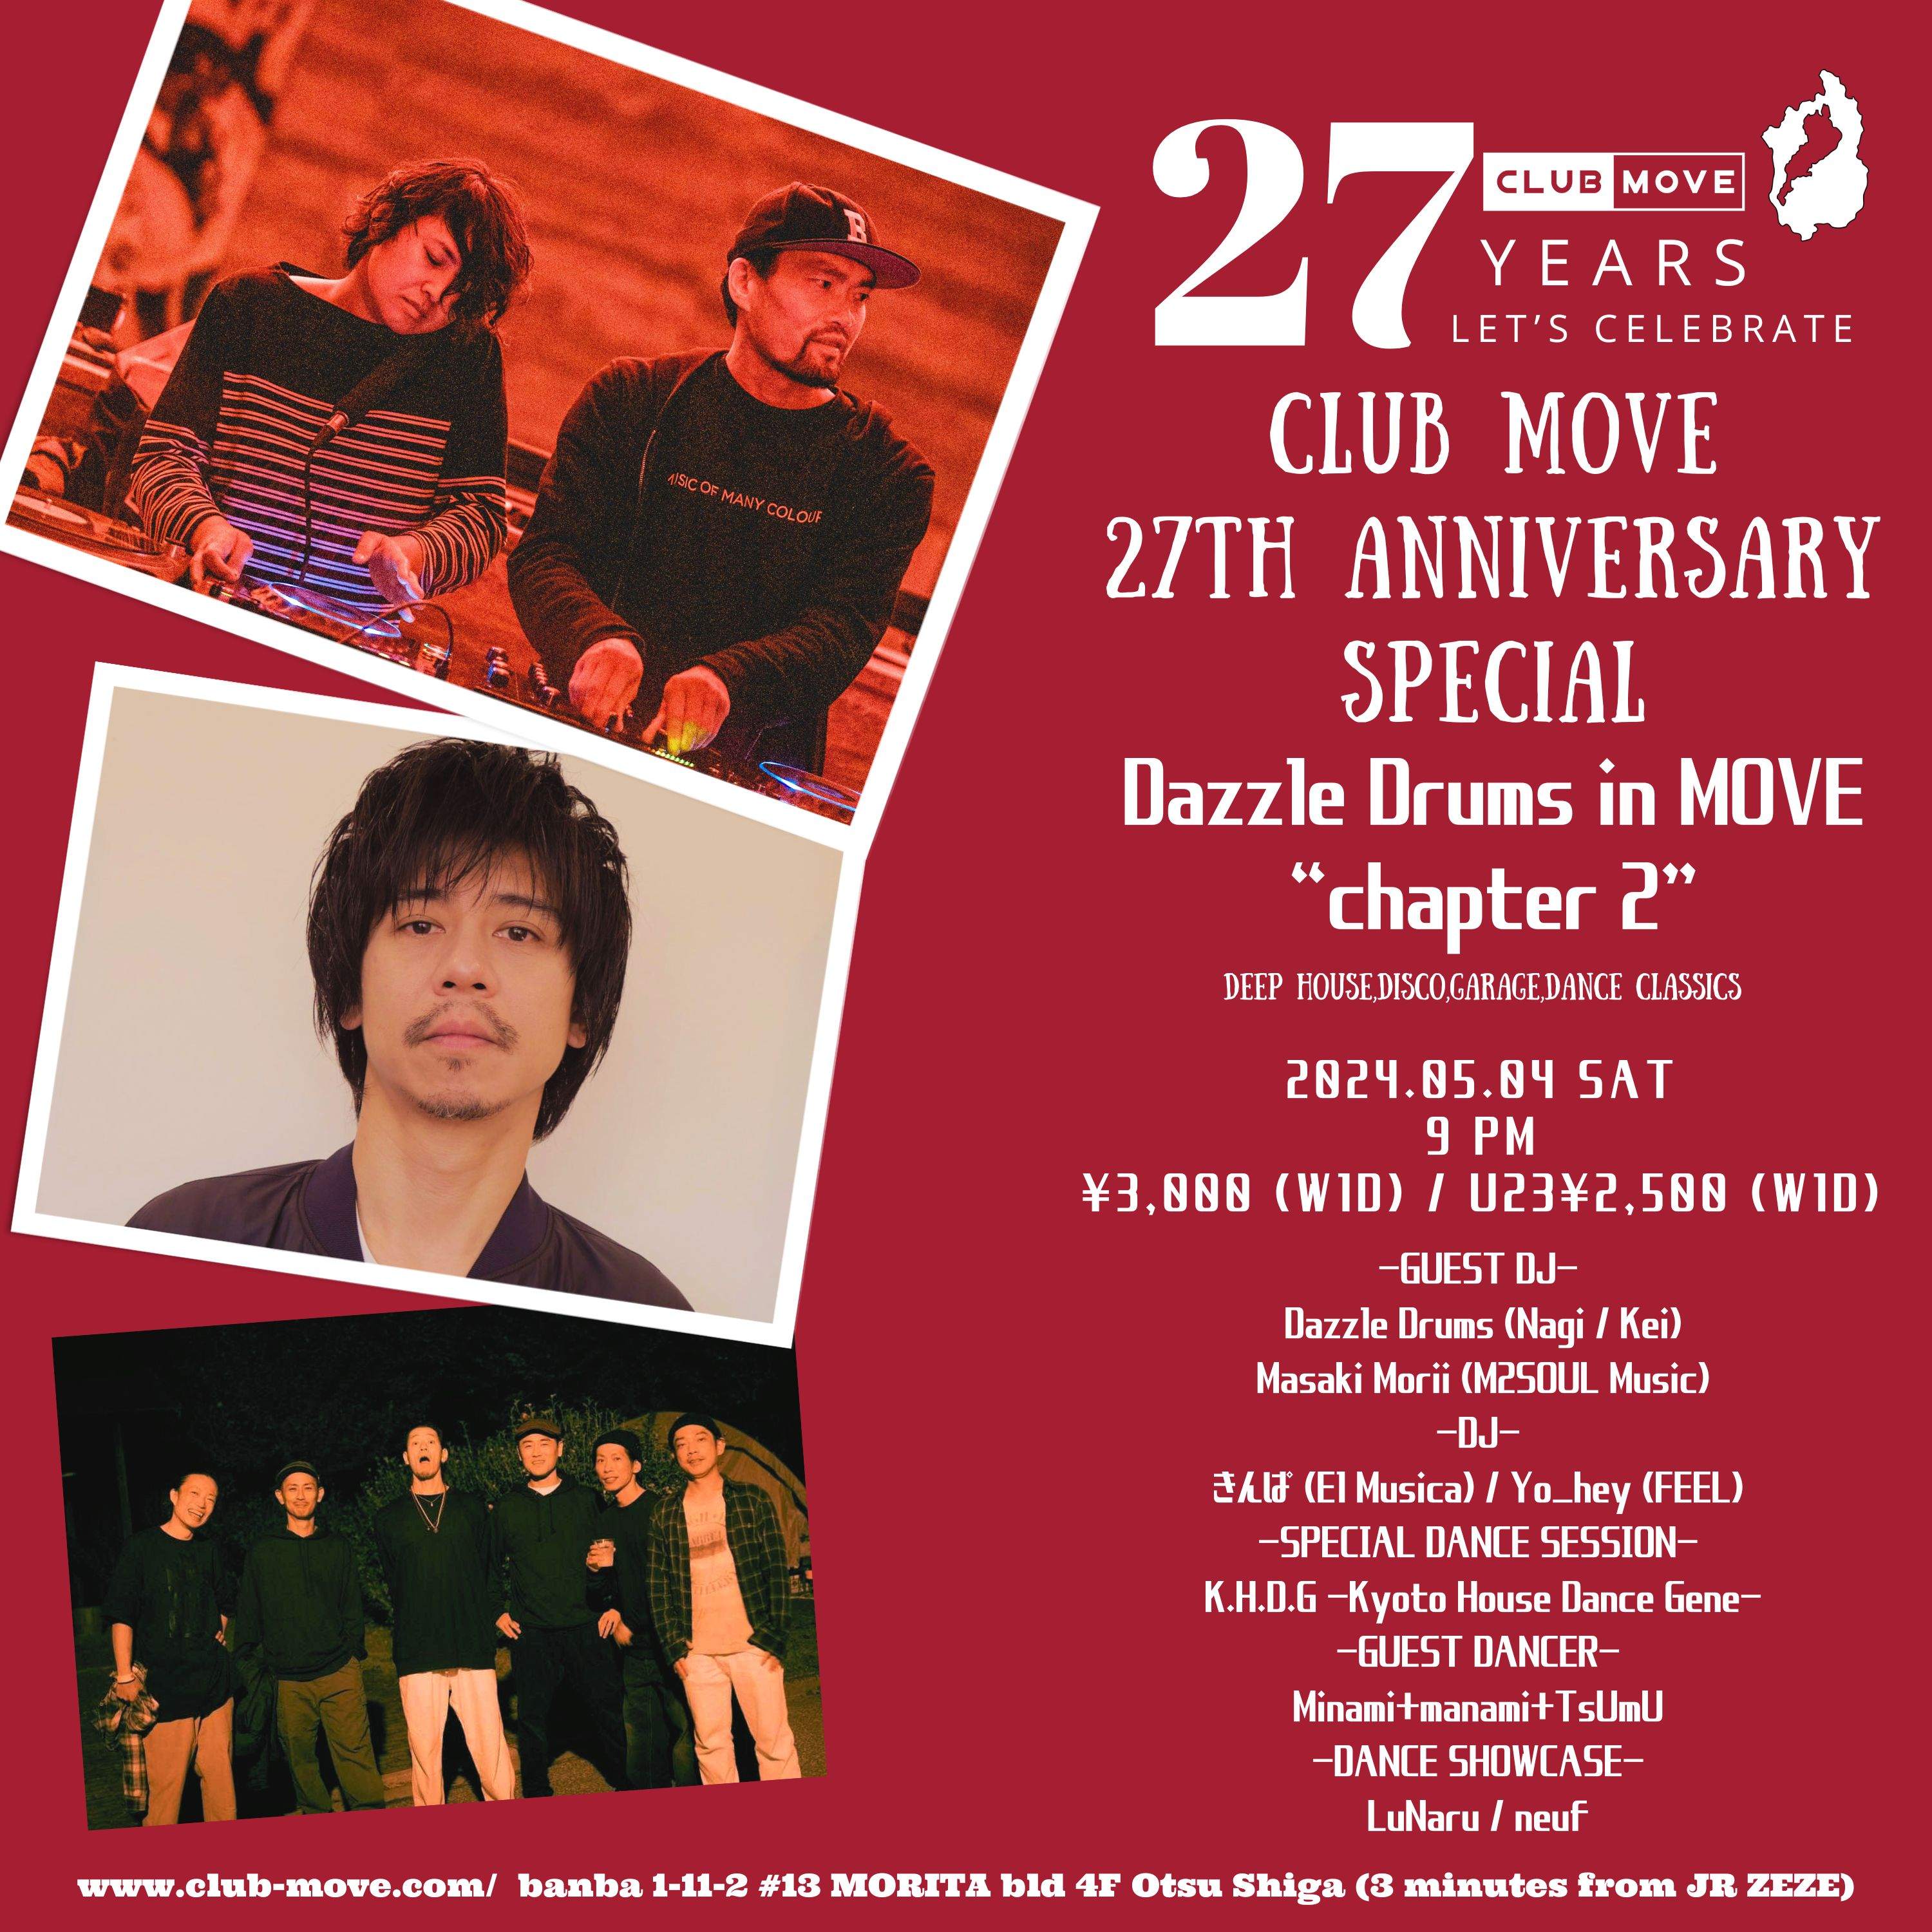 ～CLUB MOVE 27th Anniversary Special～ Dazzle Drums in MOVE -chapter 2- - Página frontal